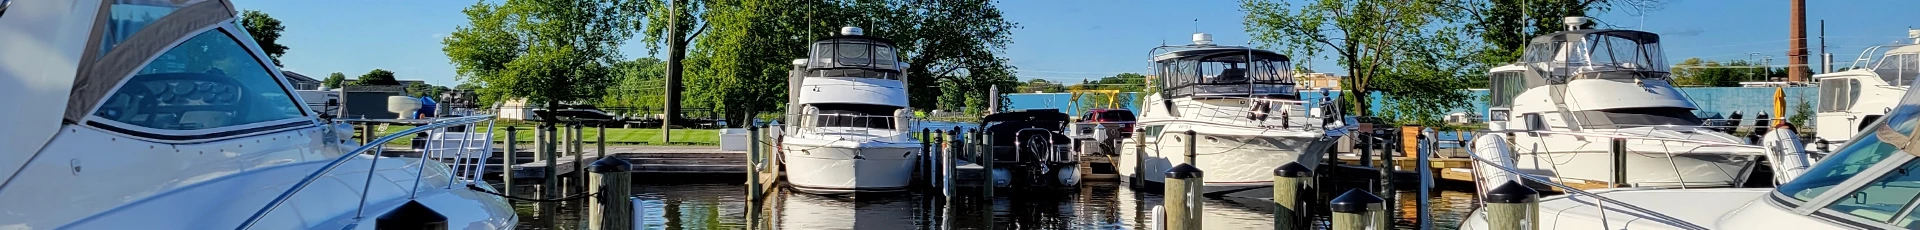 Boat Removal, Dismantle and Disposal in Titusville Florida